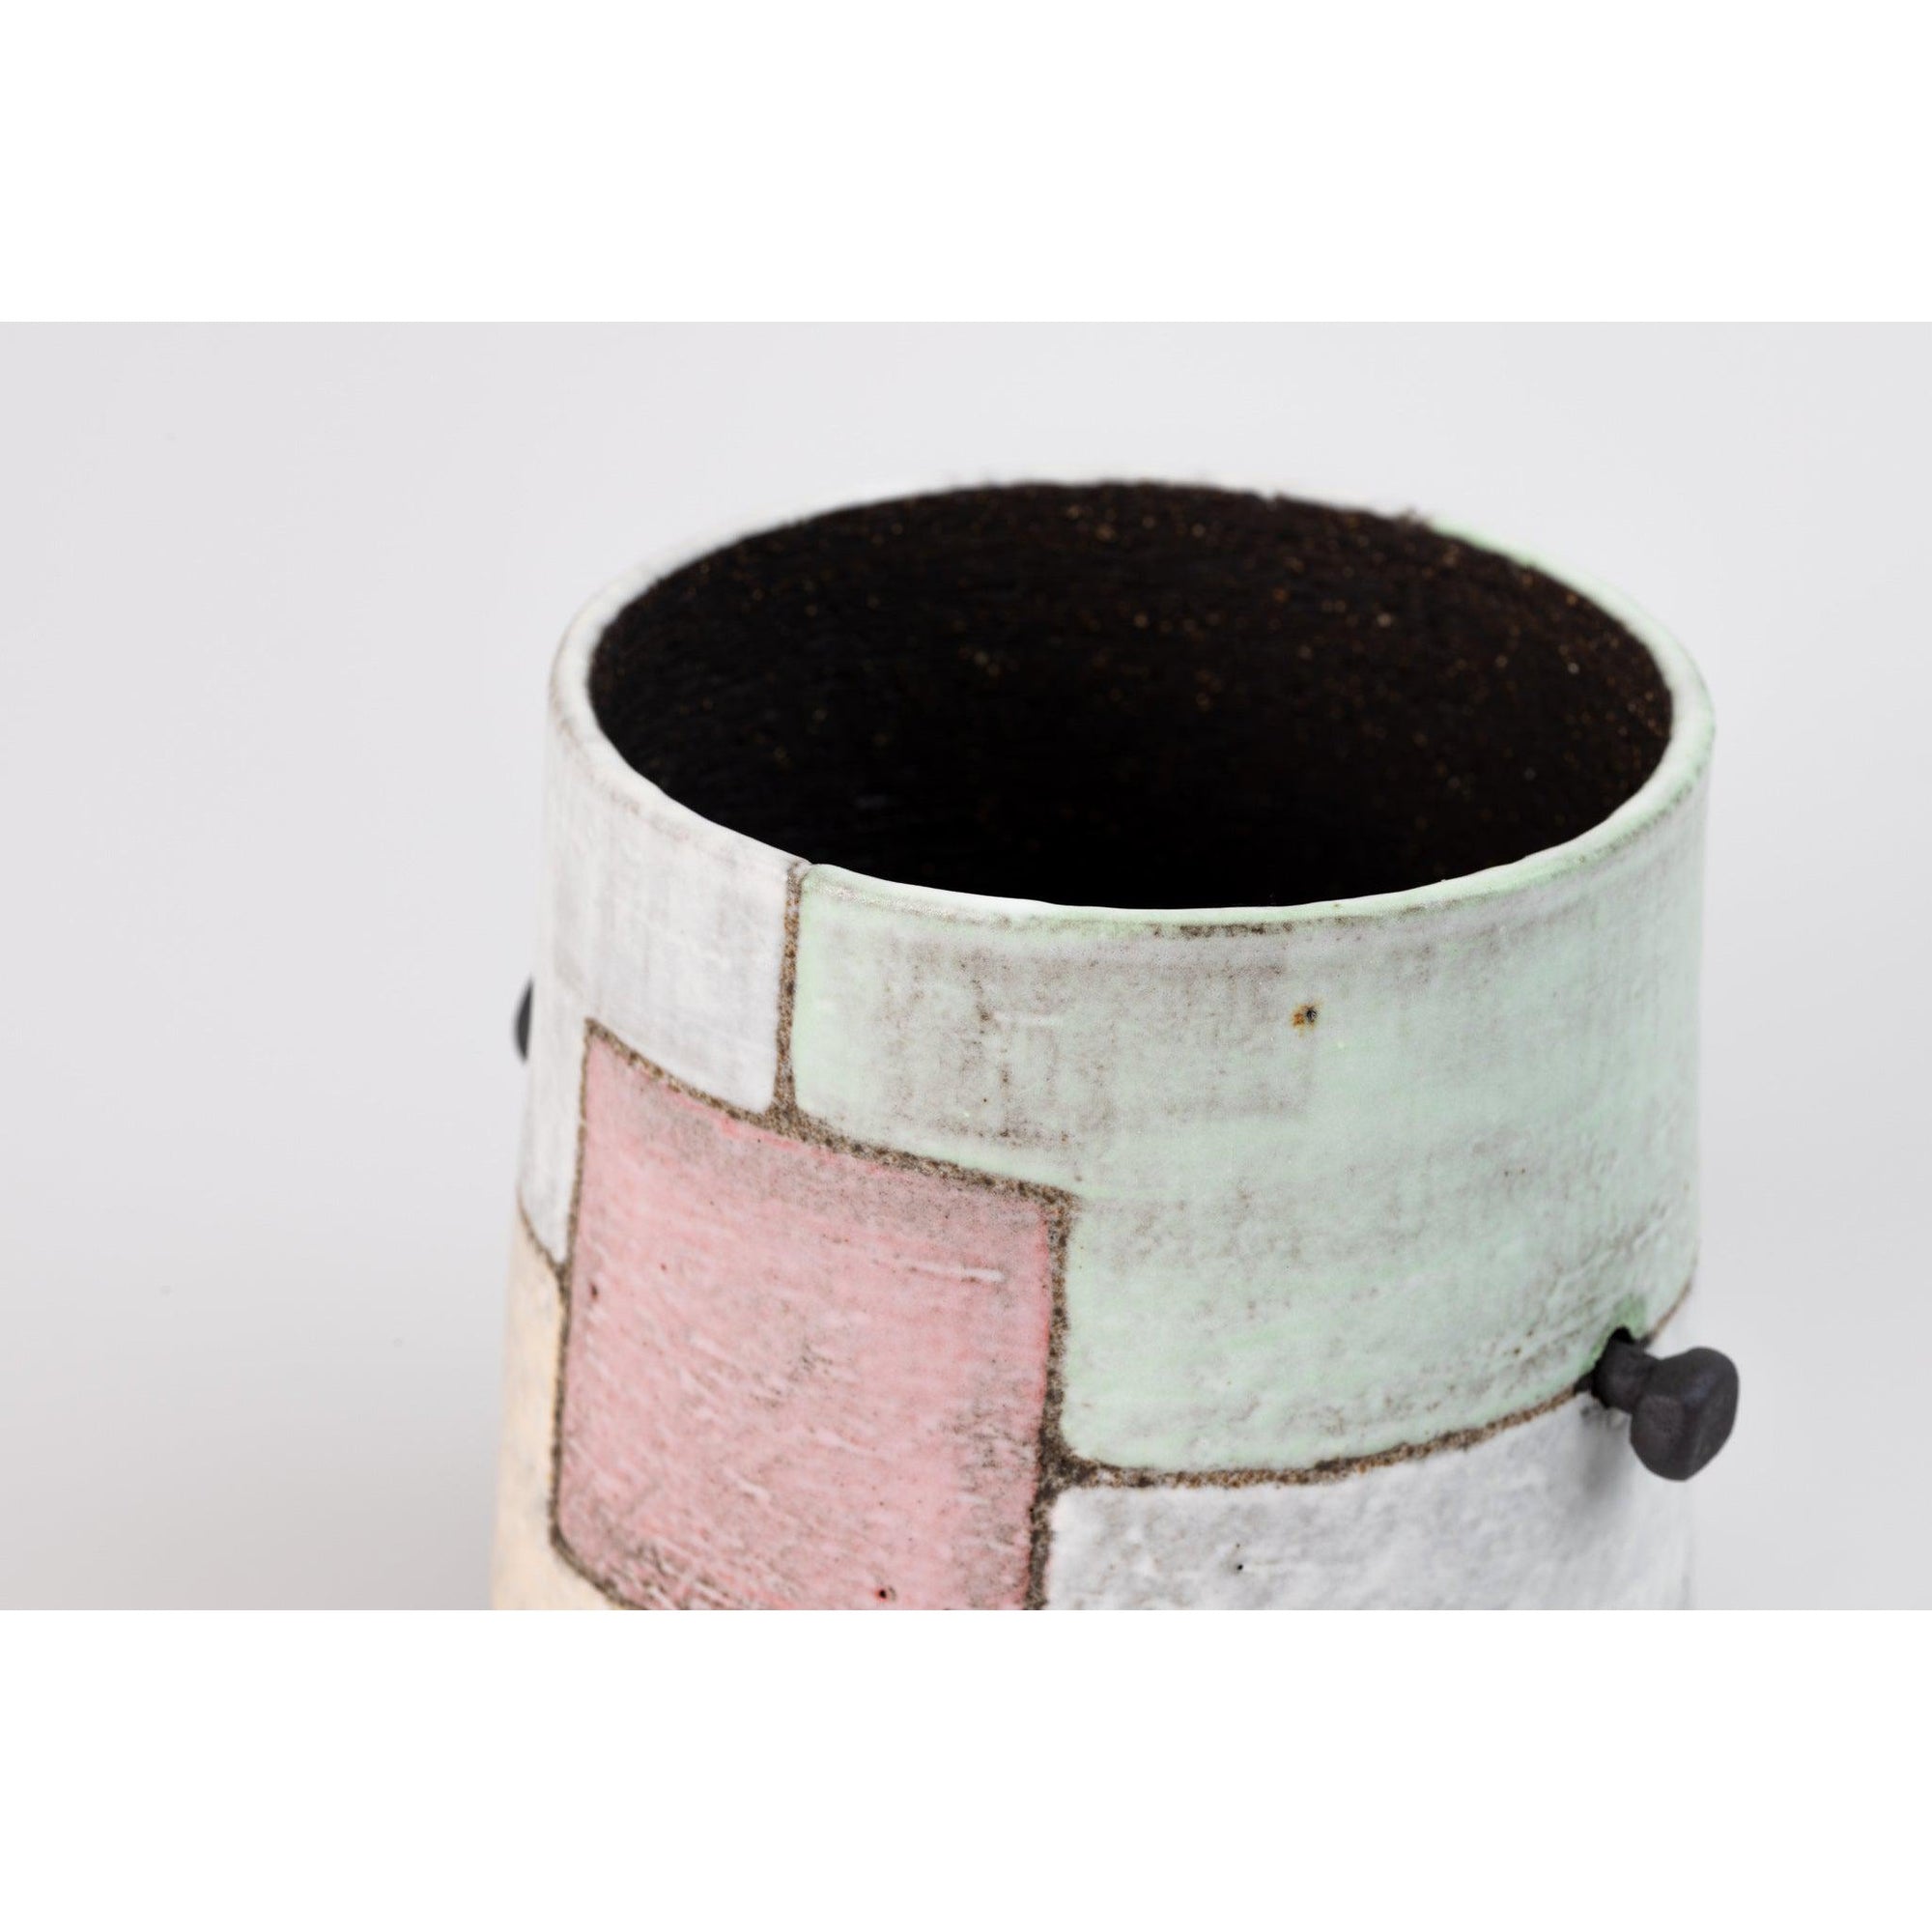 'AP40a Black Vessel with "washed" colours' by Ania Perkowska, available at Padstow Gallery, Cornwall